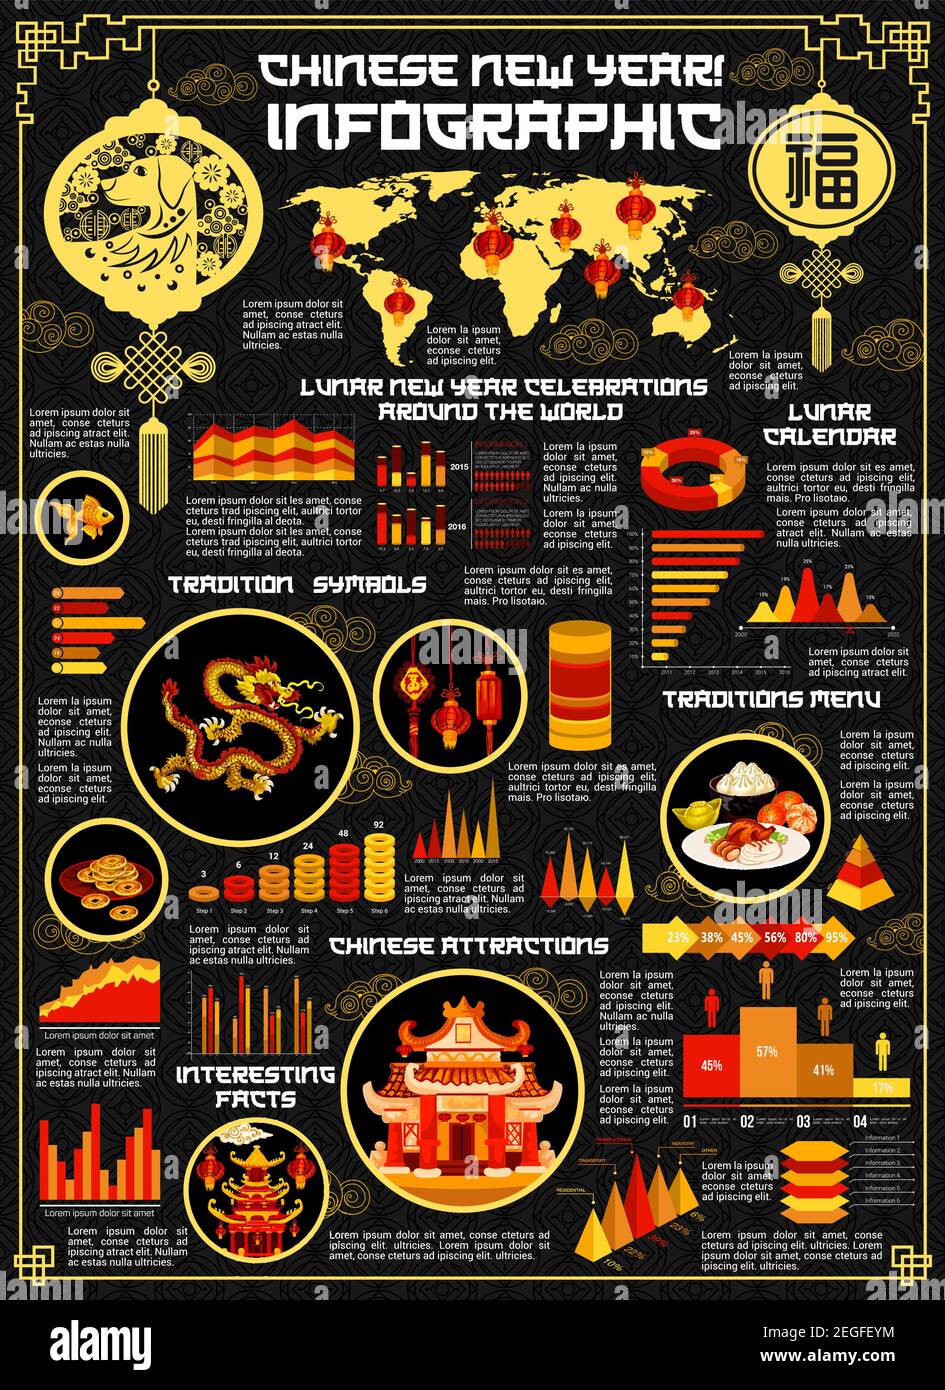 Chinese New Year Symbols: Decorations and Traditions